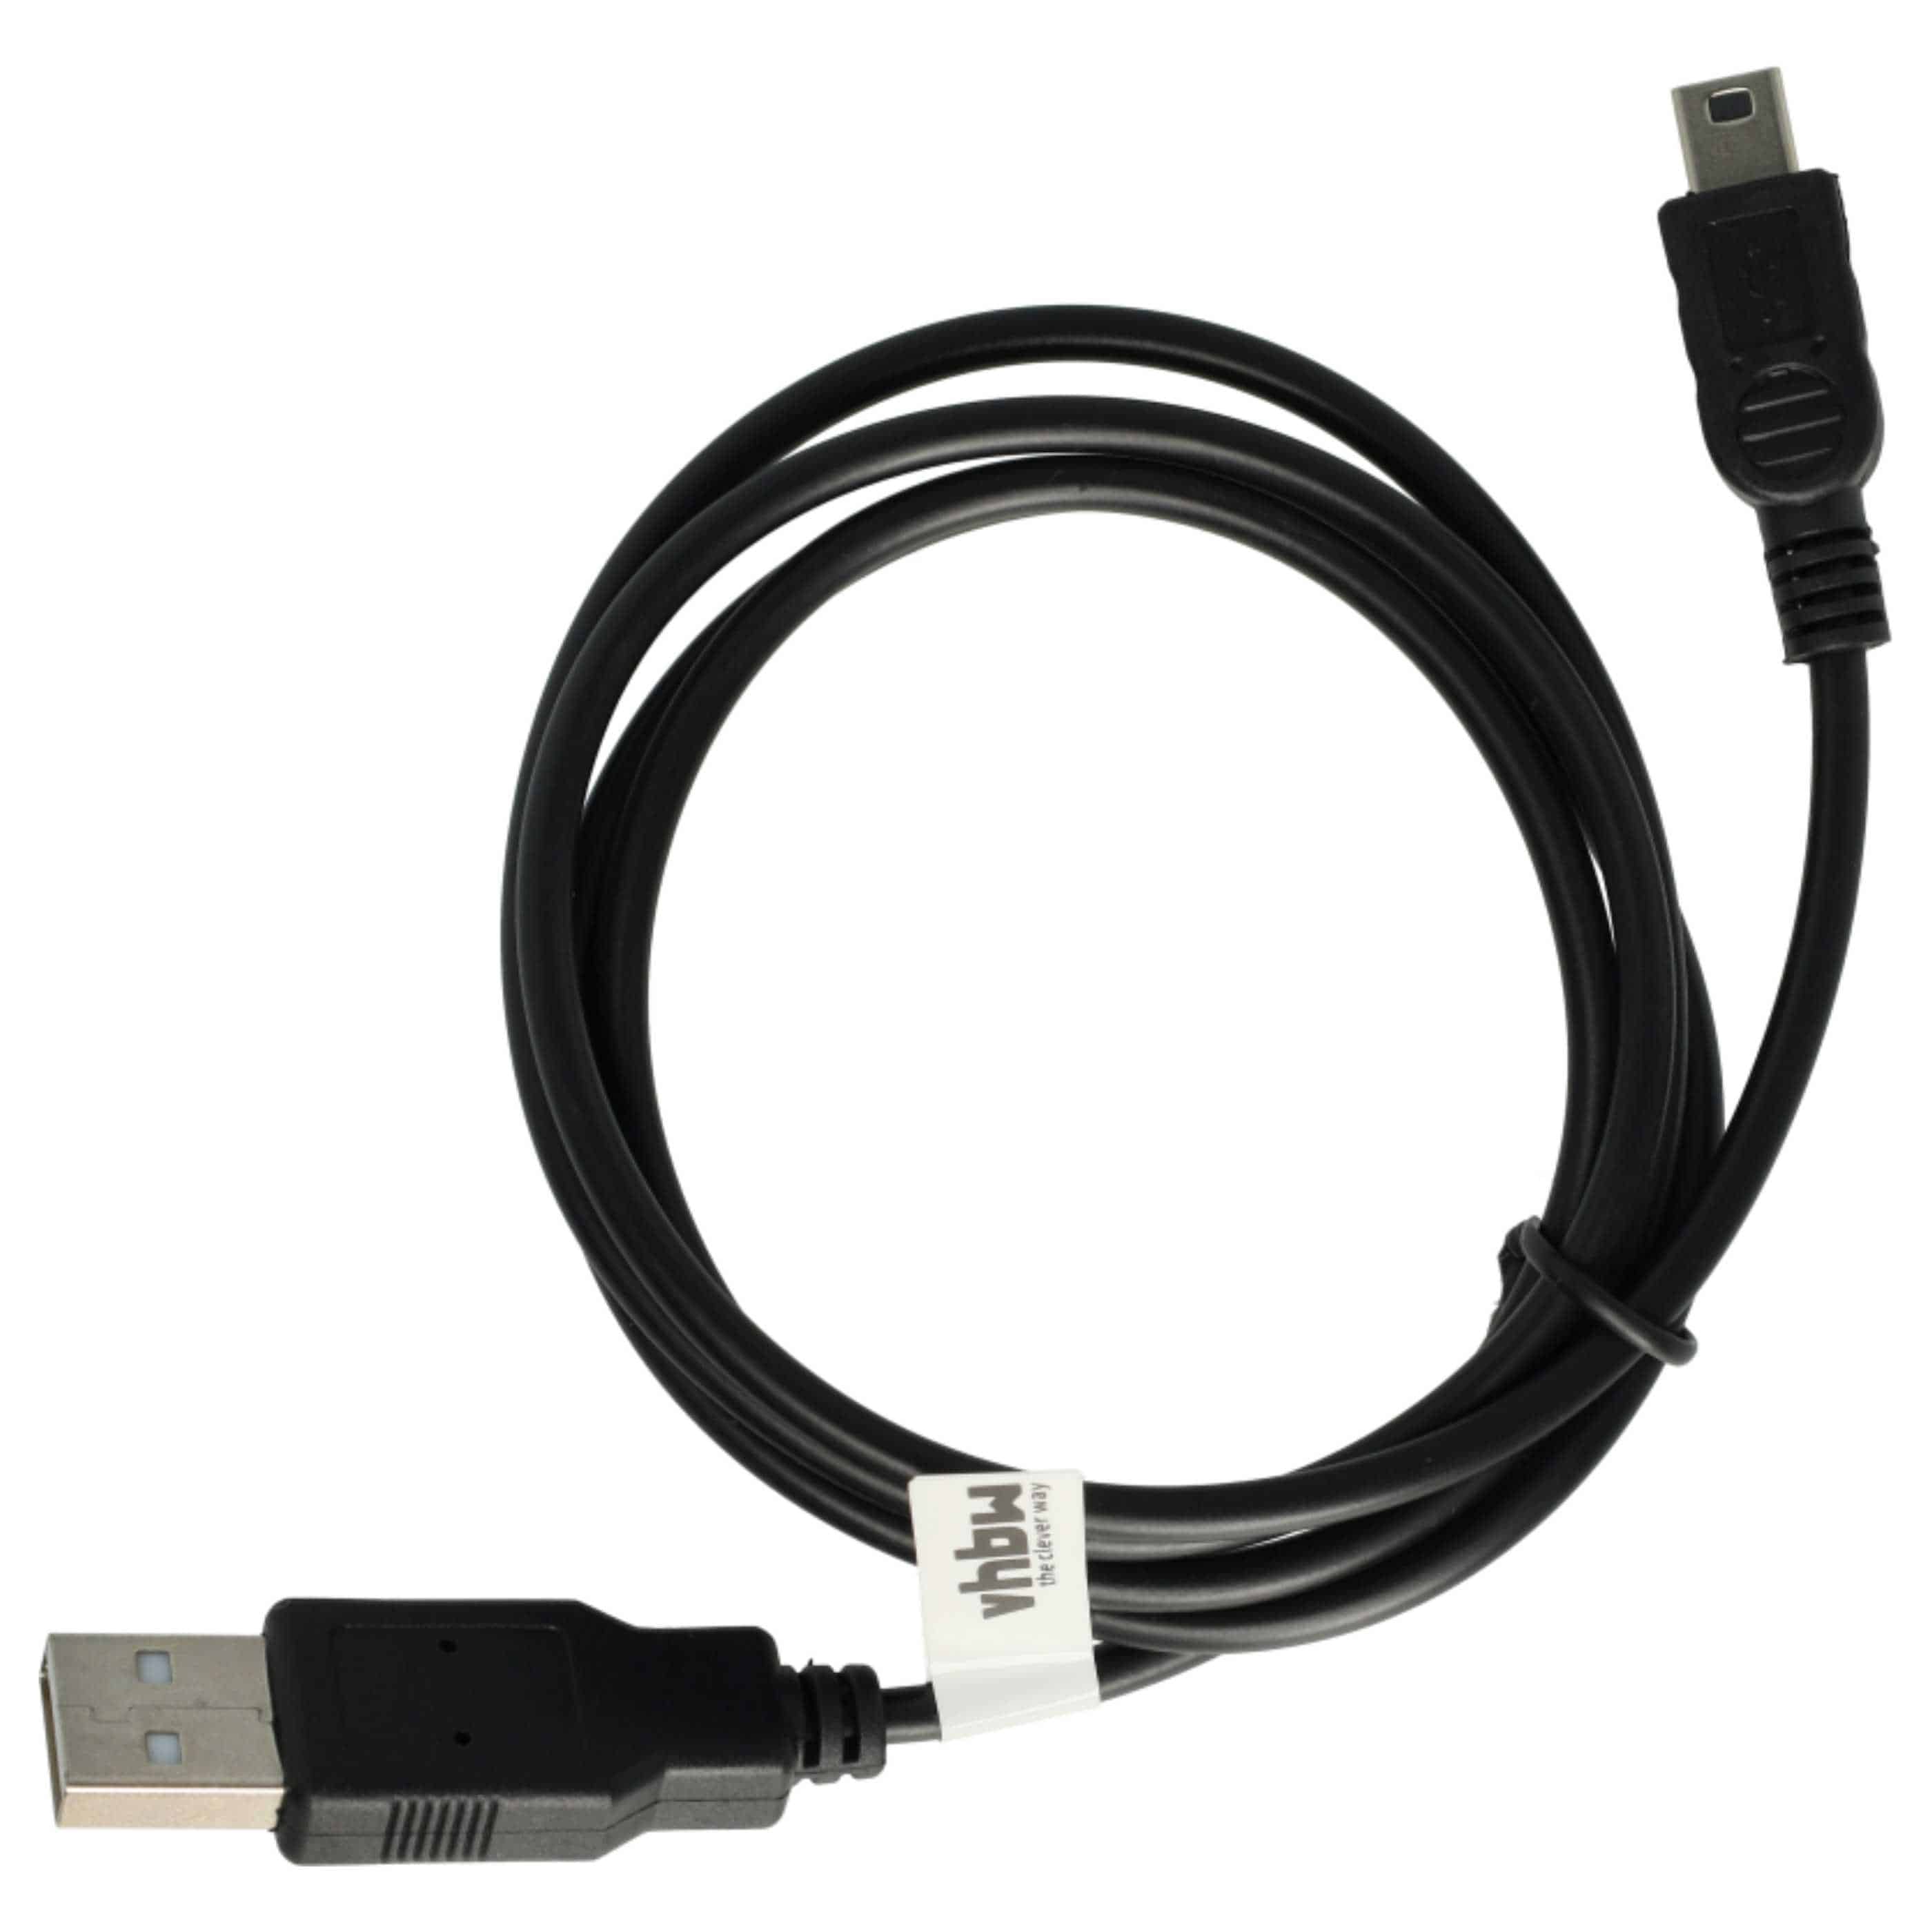 vhbw USB Cable Games Console - 2in1 Data Cable / Charger 1m Long100cm Long